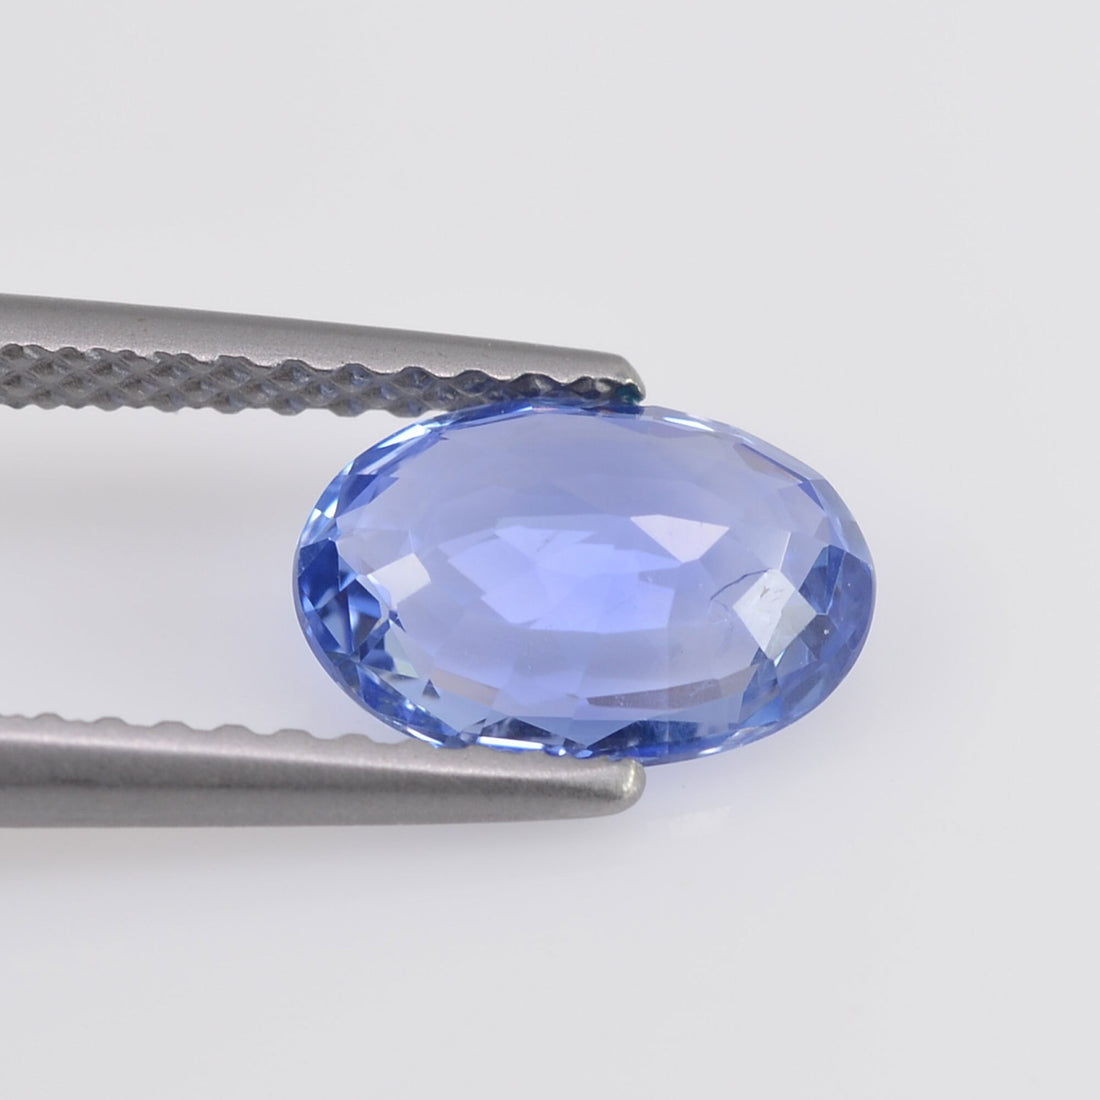 1.34 cts Natural Blue Sapphire Loose Gemstone Oval Cut Certified